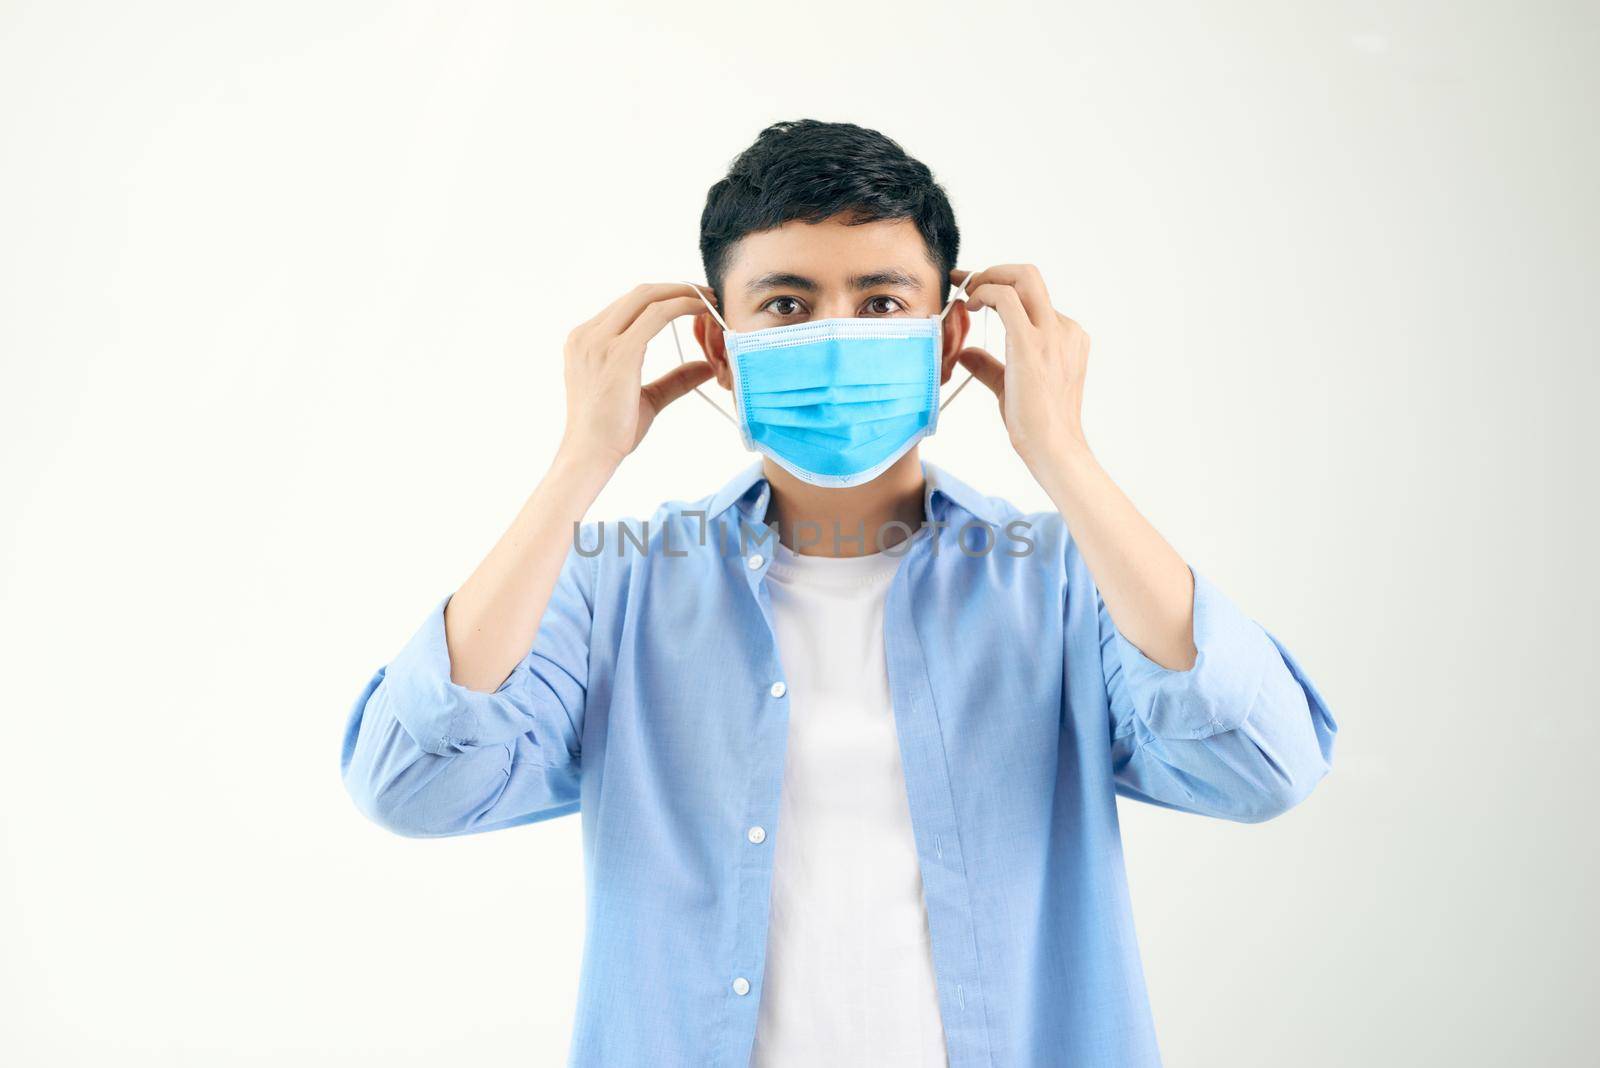 COVID-19 Coronavirus portrait handsome young asian man wearing mask protection from covid 19 isolated on white background in studio. Asian man people. COVID-19 concept.